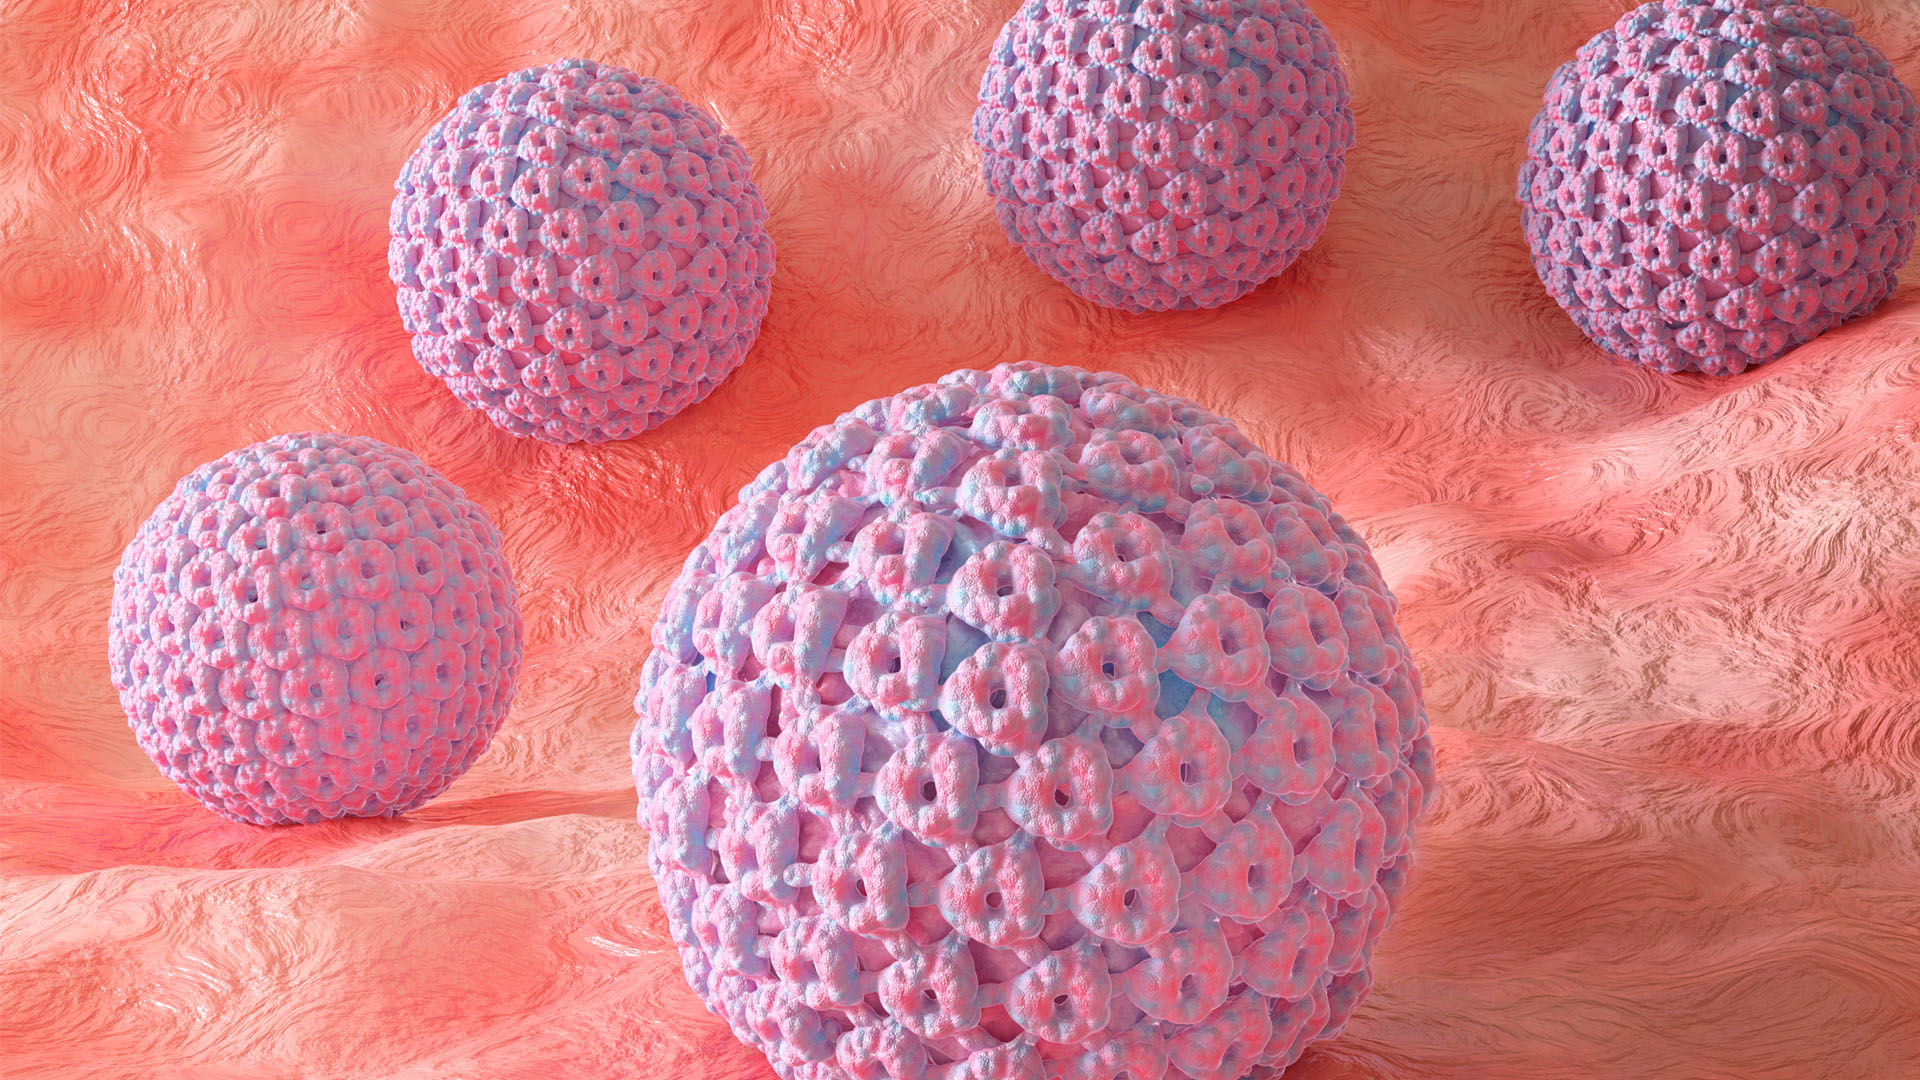 Reducing Risk of Head and Neck HPV Cancers in People Living with HIV